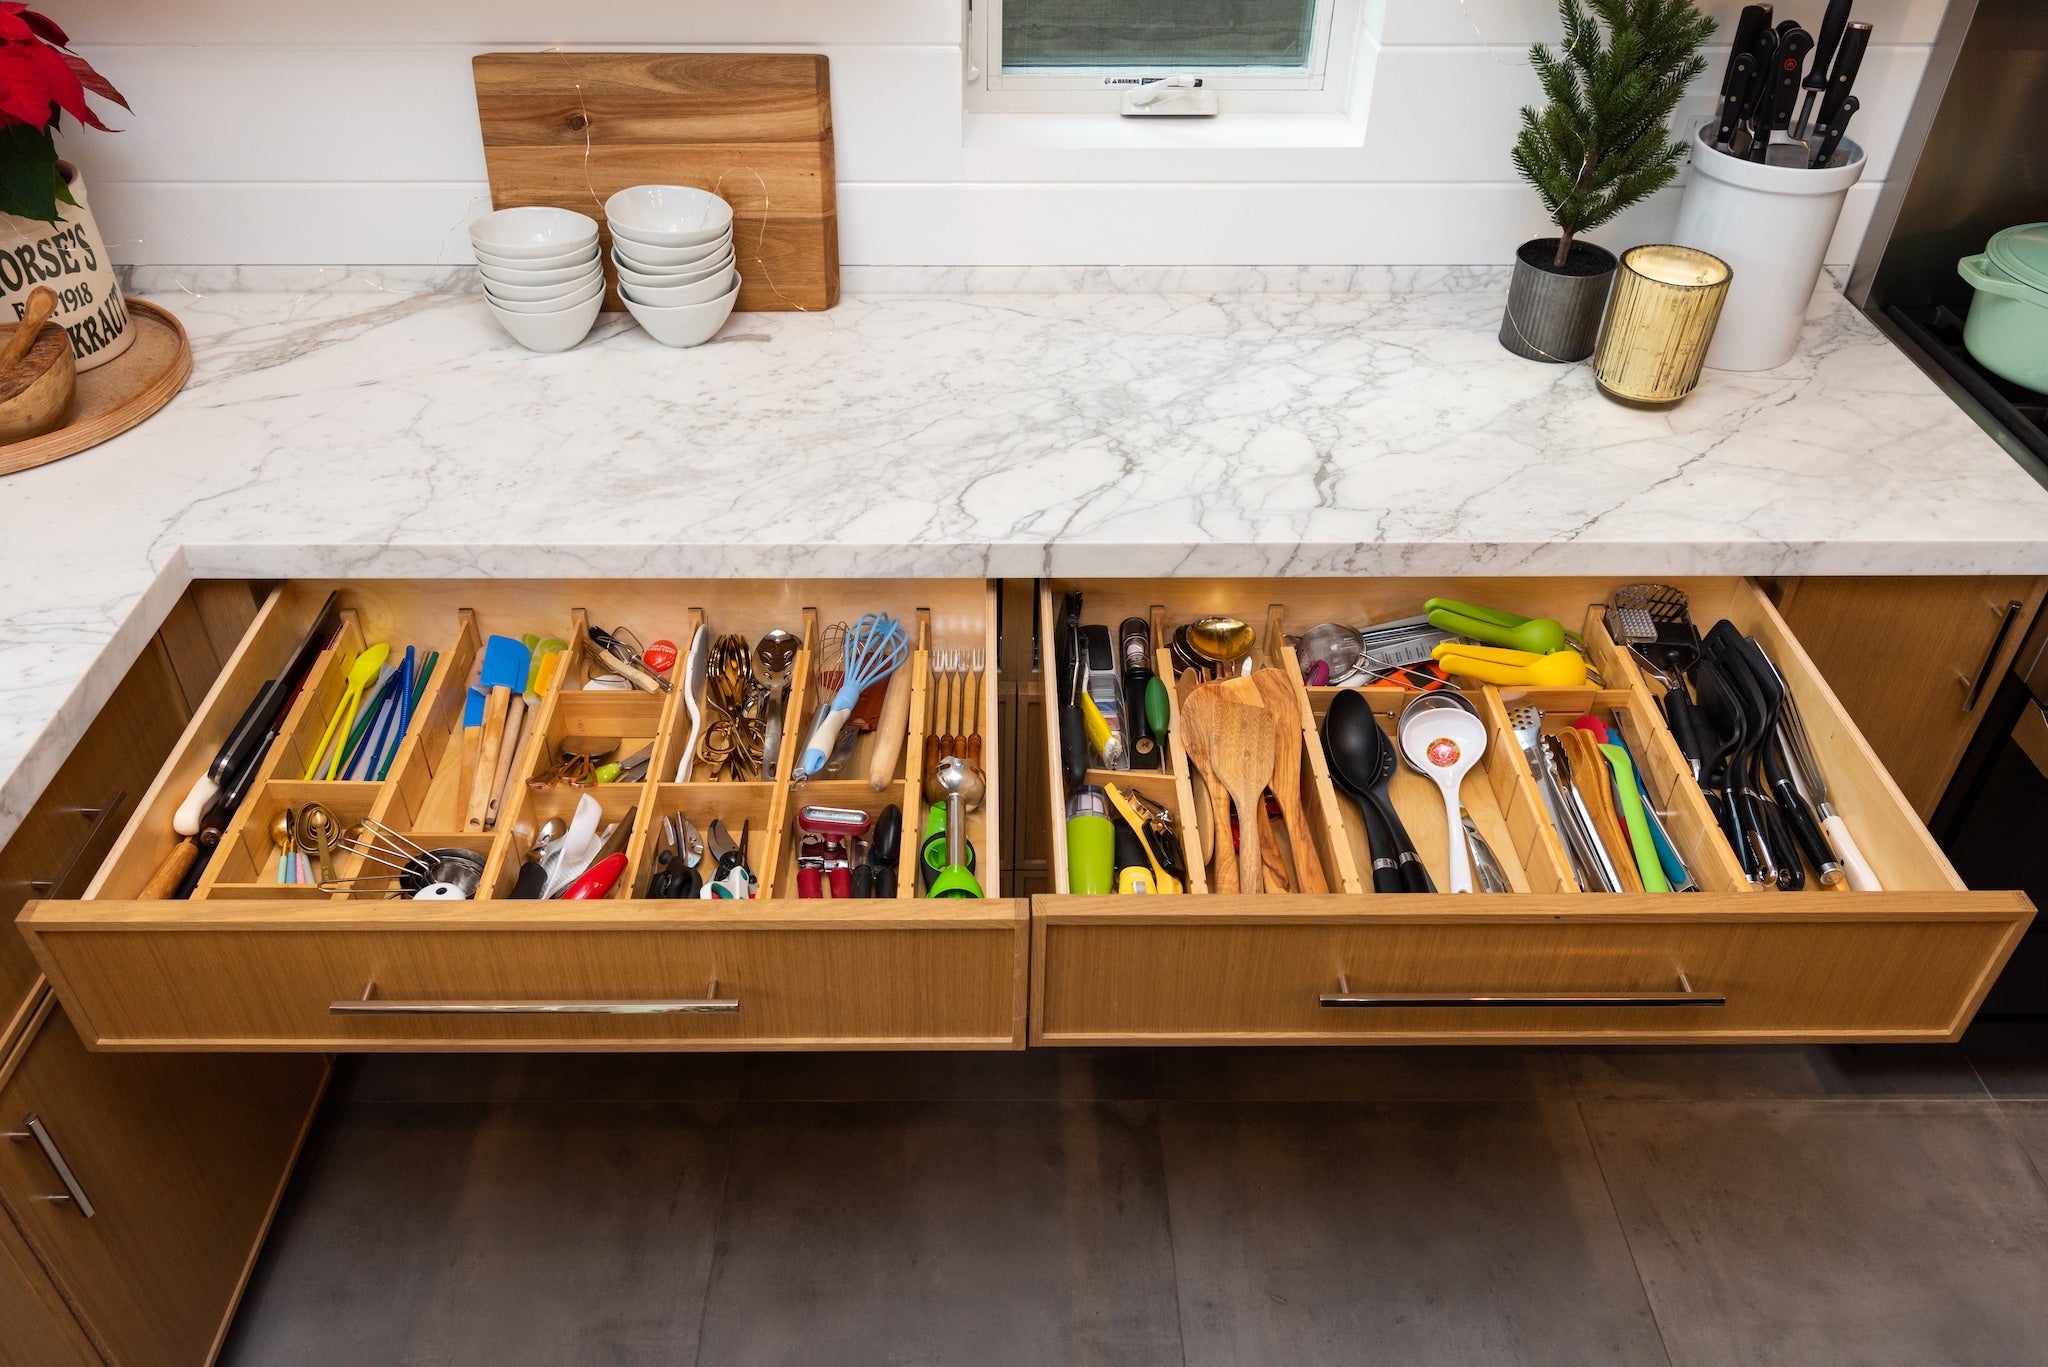 The Kitchen Drawer Makeover That Changed My Life - The Shop By Jasmine Roth